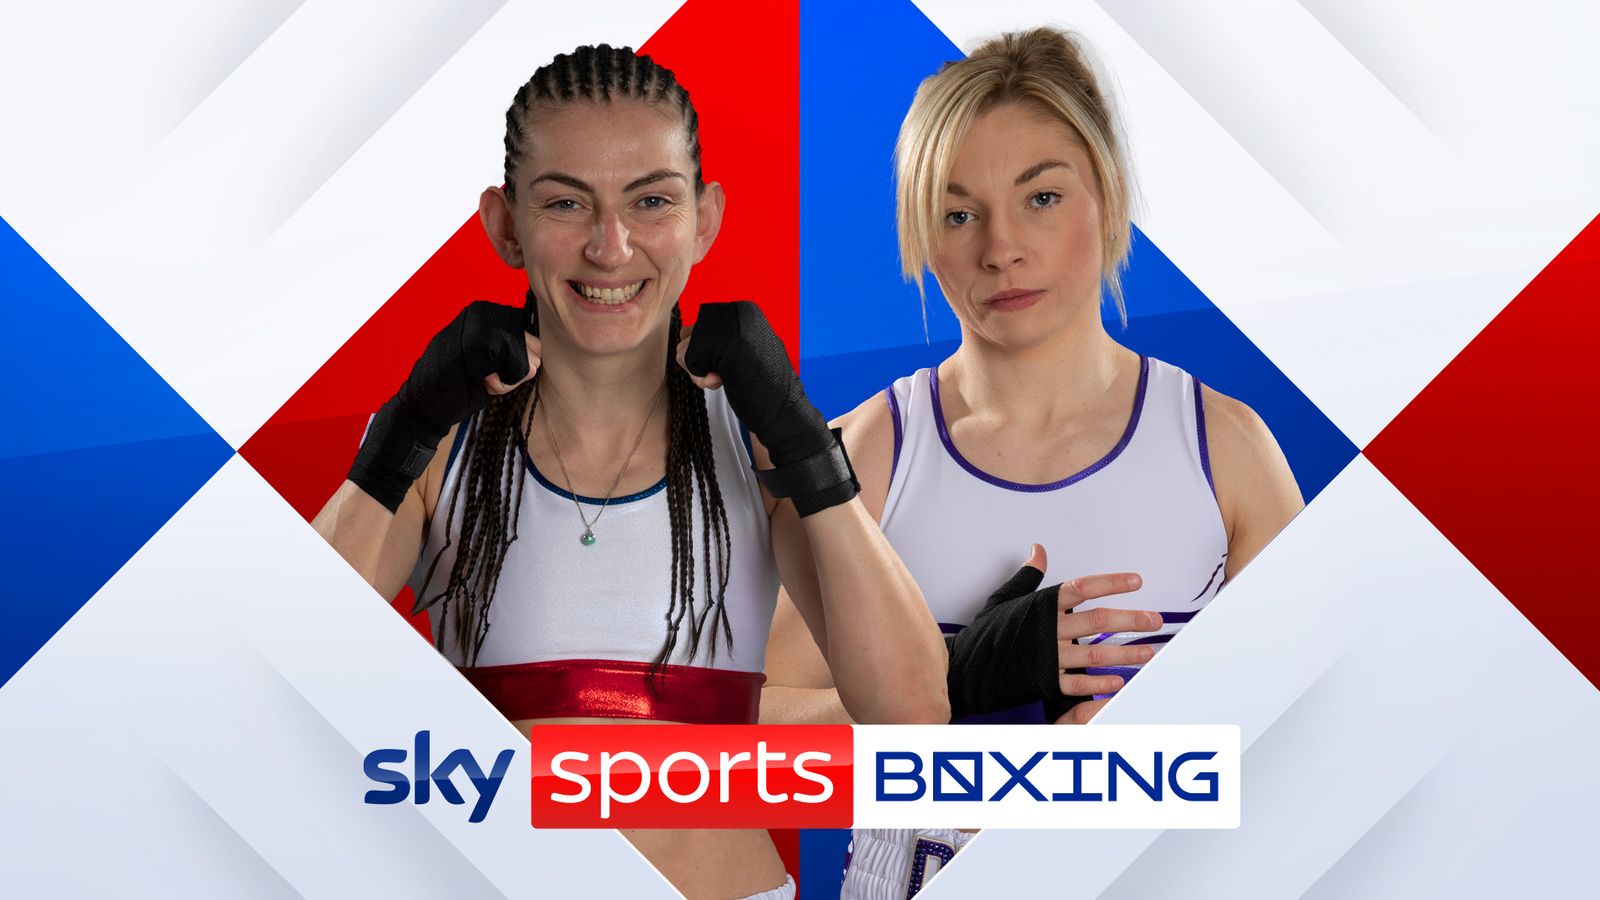 Lauren Price and Karriss Artingstall confirmed on historic Claressa Shields-Savannah Marshall card at O2 Arena